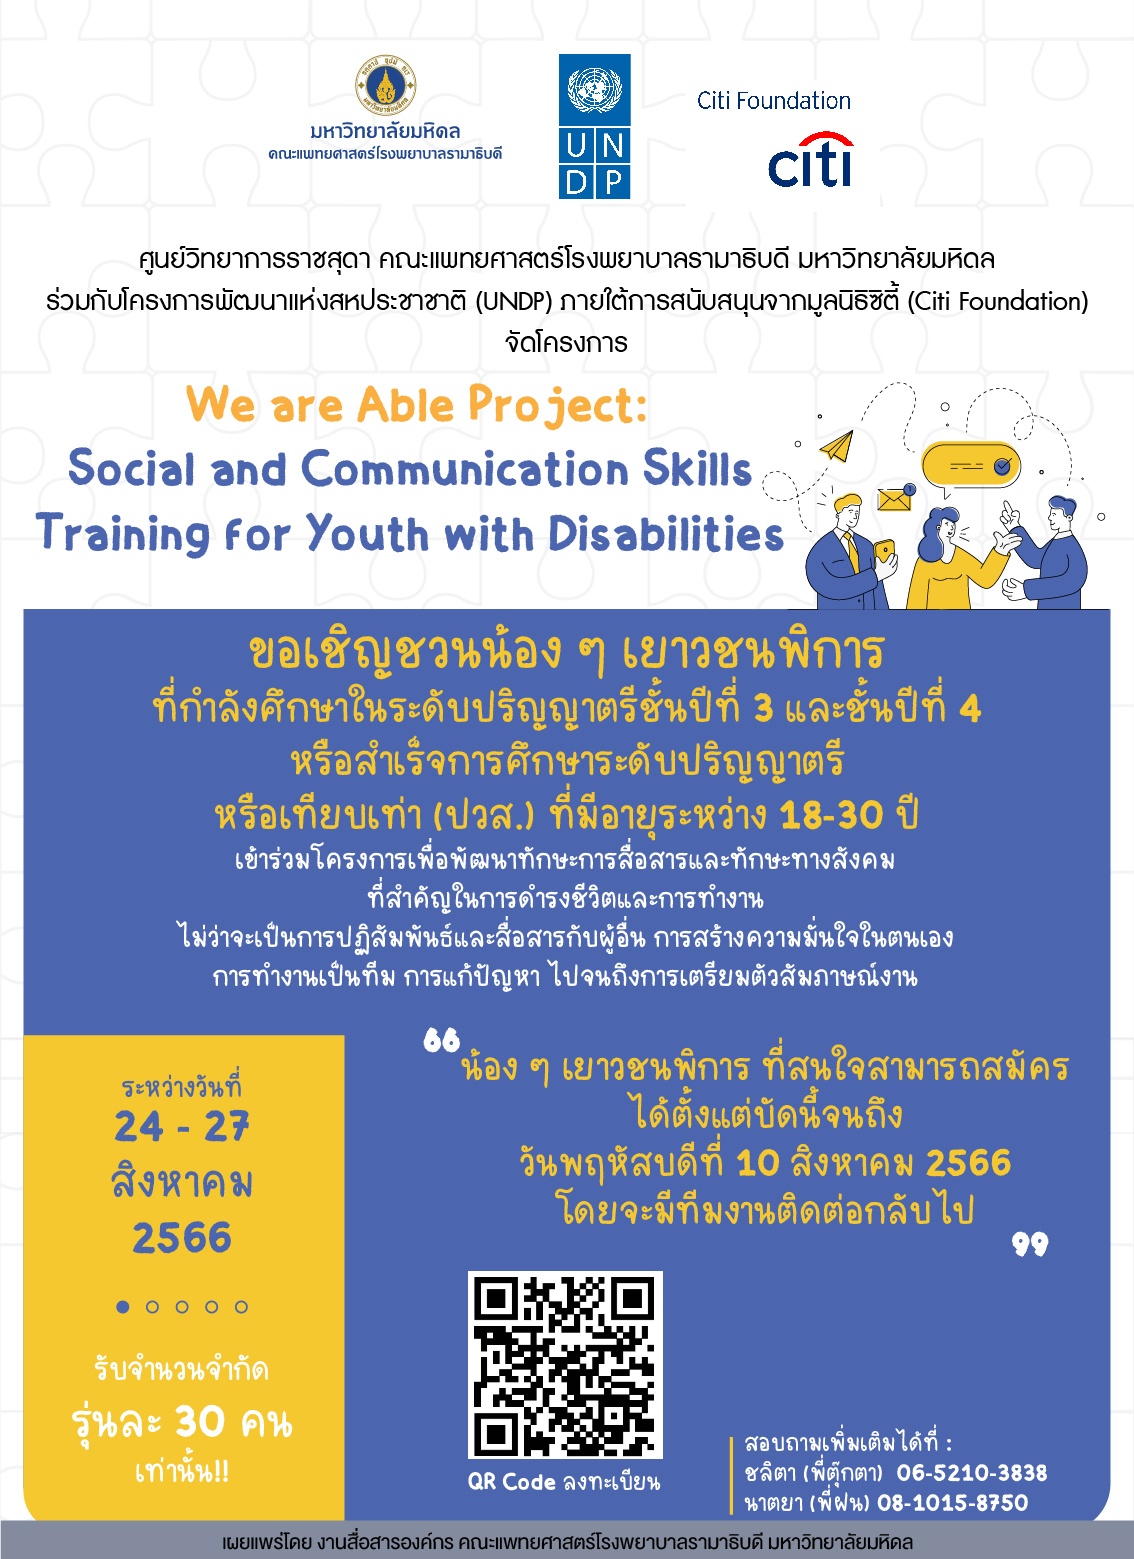 We are Able Project: Social and Communication Skills Training for Youth with Disabilities